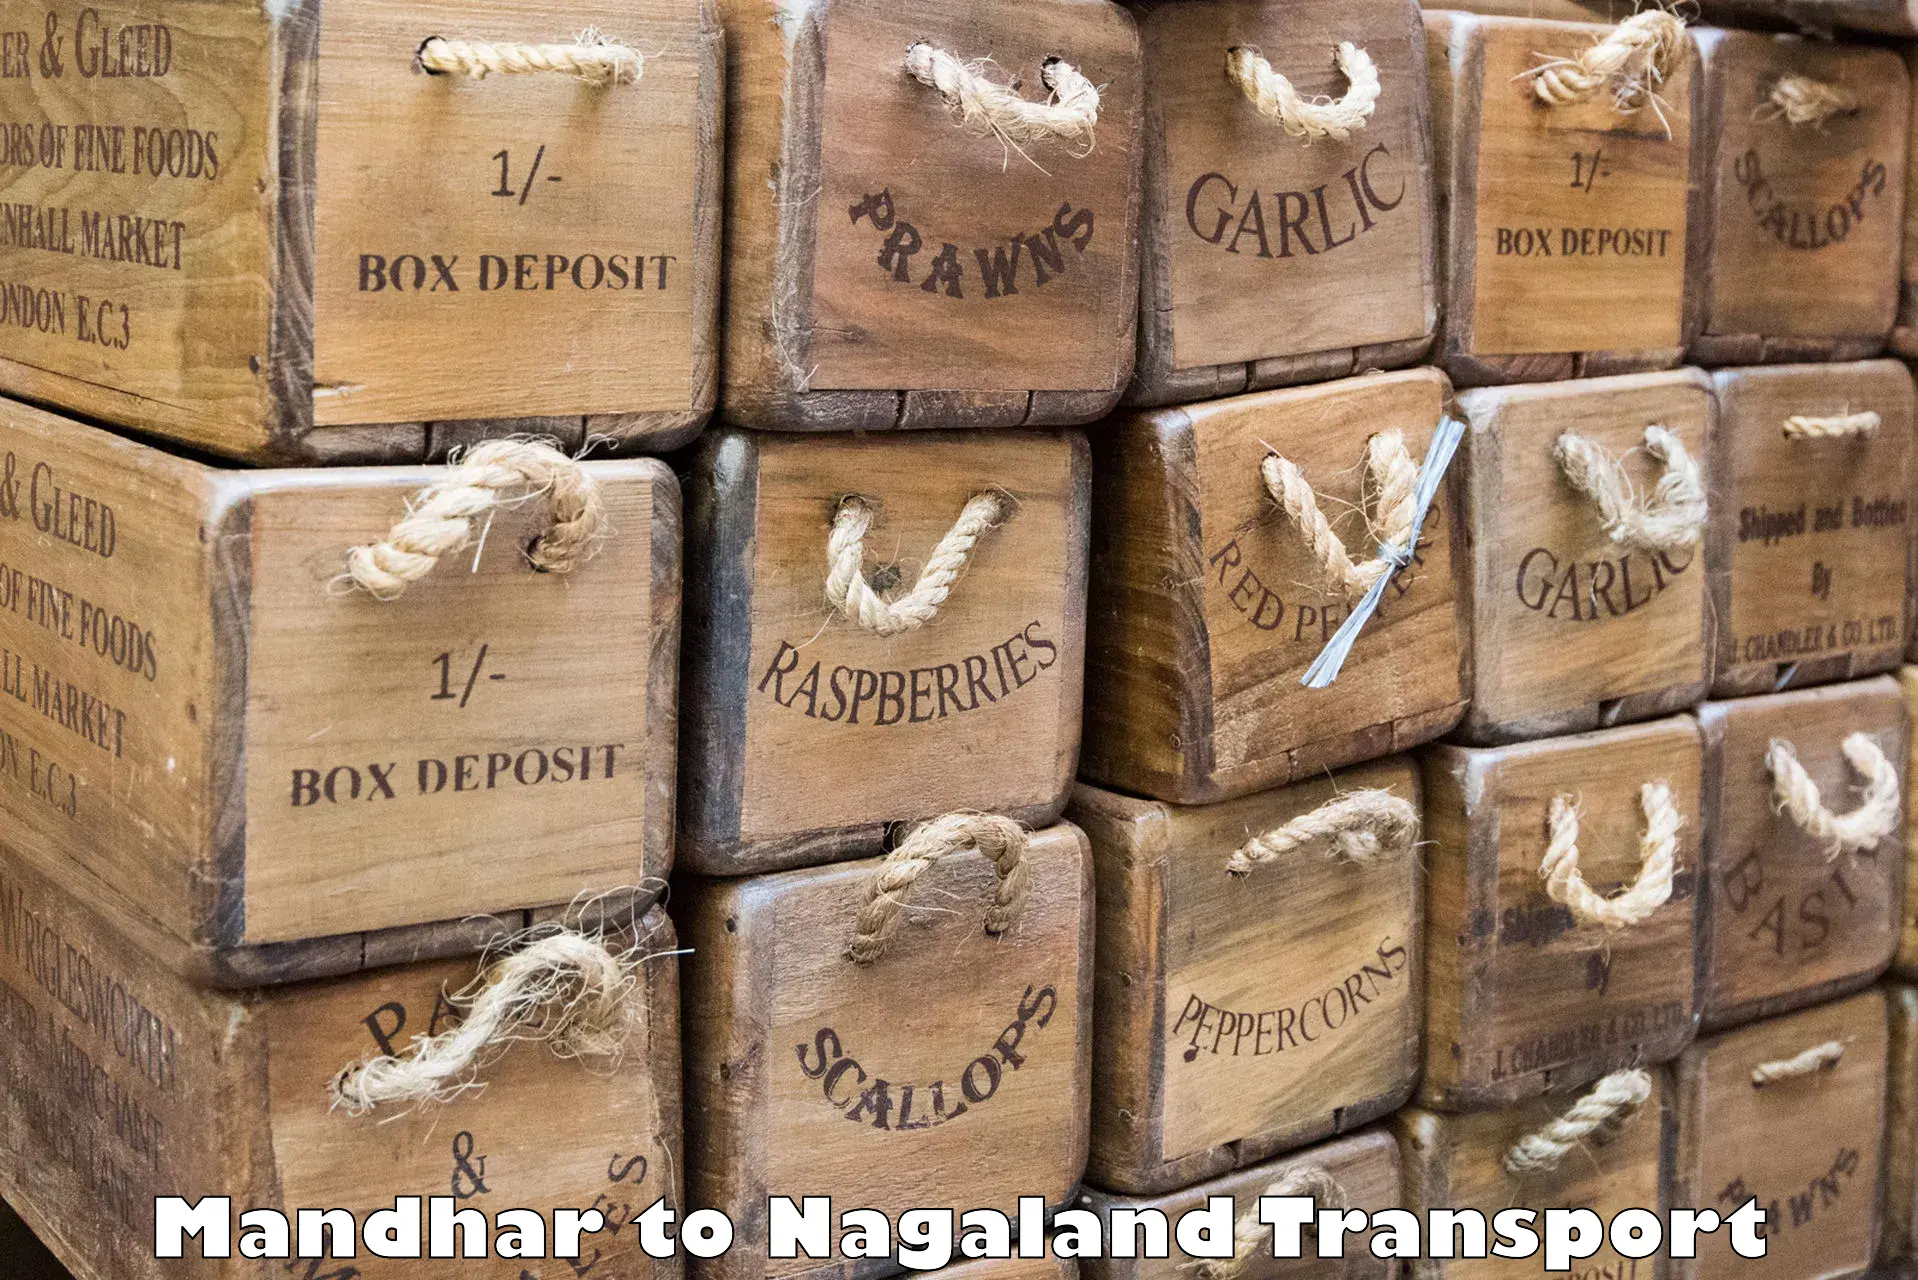 Air freight transport services in Mandhar to Nagaland